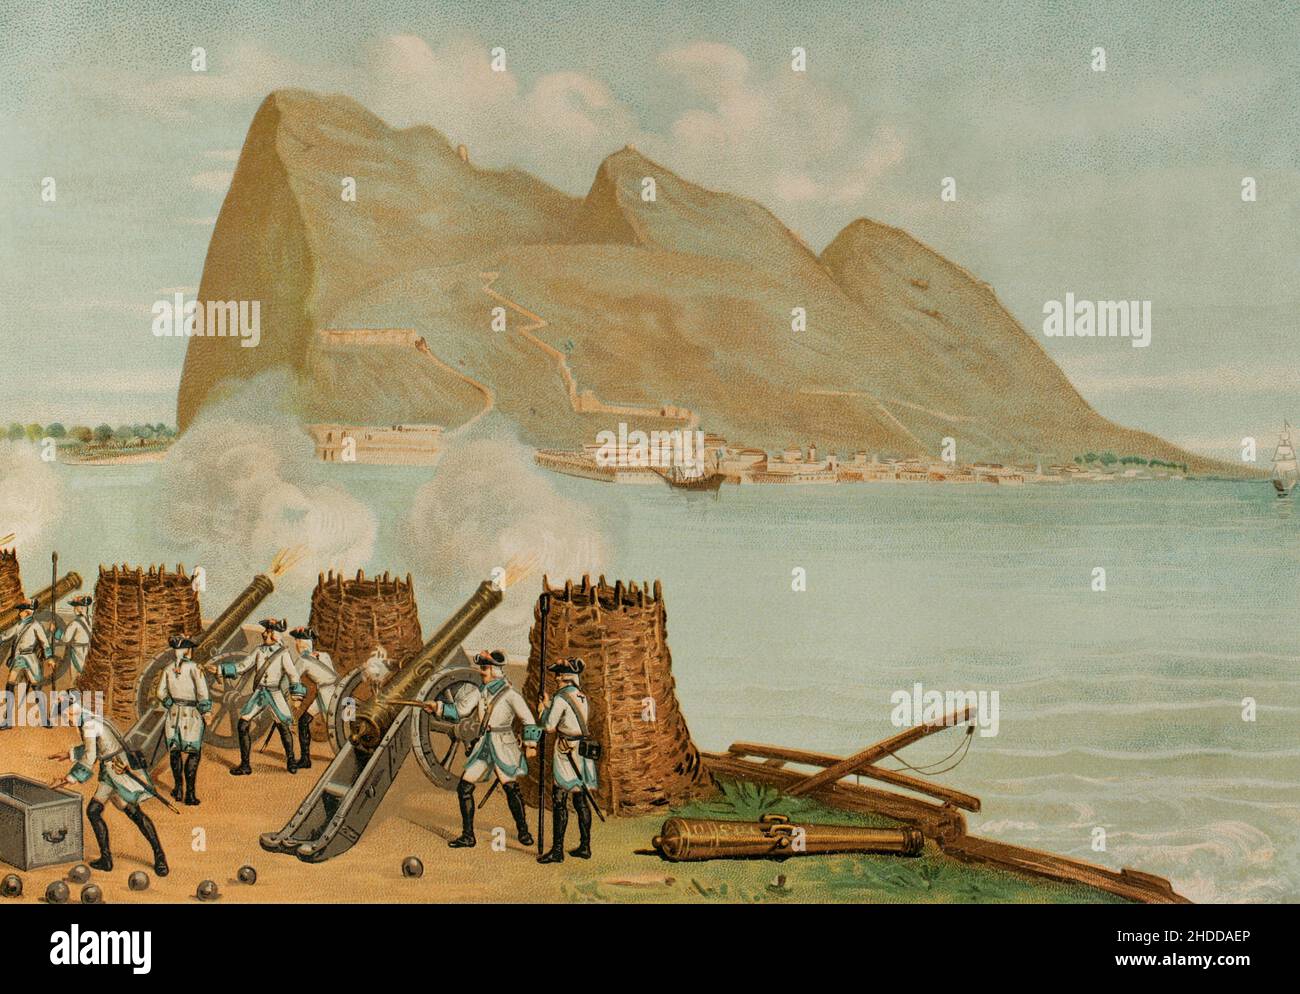 History of Spain. 18th century. Illustration depicting one of the sieges of Gibraltar. Spanish troops trying to recover the territory taken by the Anglo-Dutch coalition in 1704. Unsuccessful siege of Gibraltar. Chromolithography. 'Historia General de España' (General History of Spain), by Miguel Morayta. Volume V. Madrid, 1891. Stock Photo